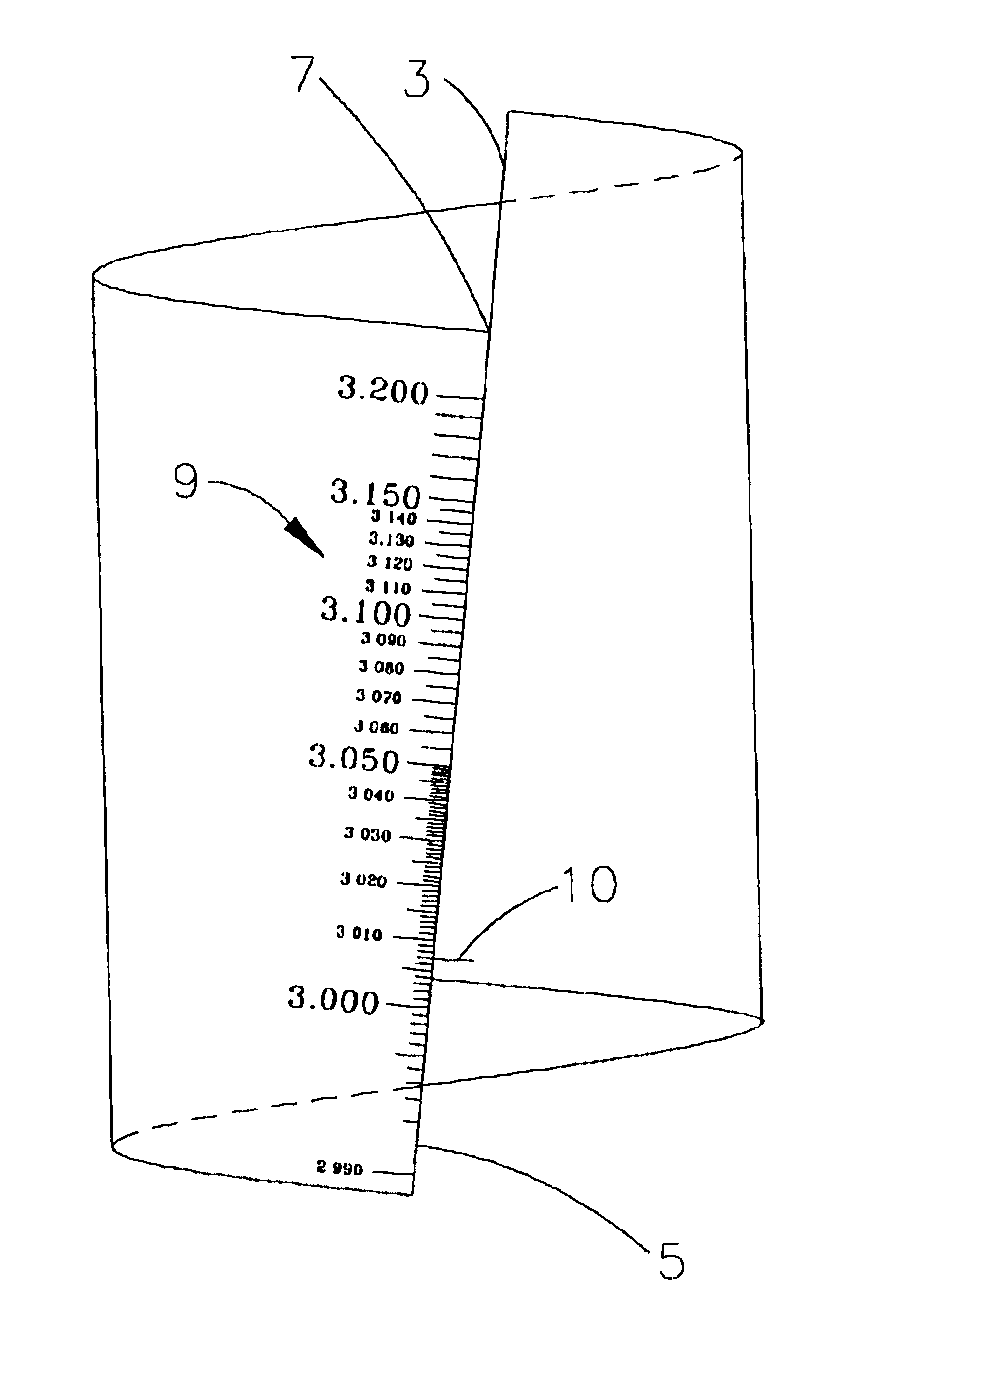 Helically formed cylinder of varying length and diameter